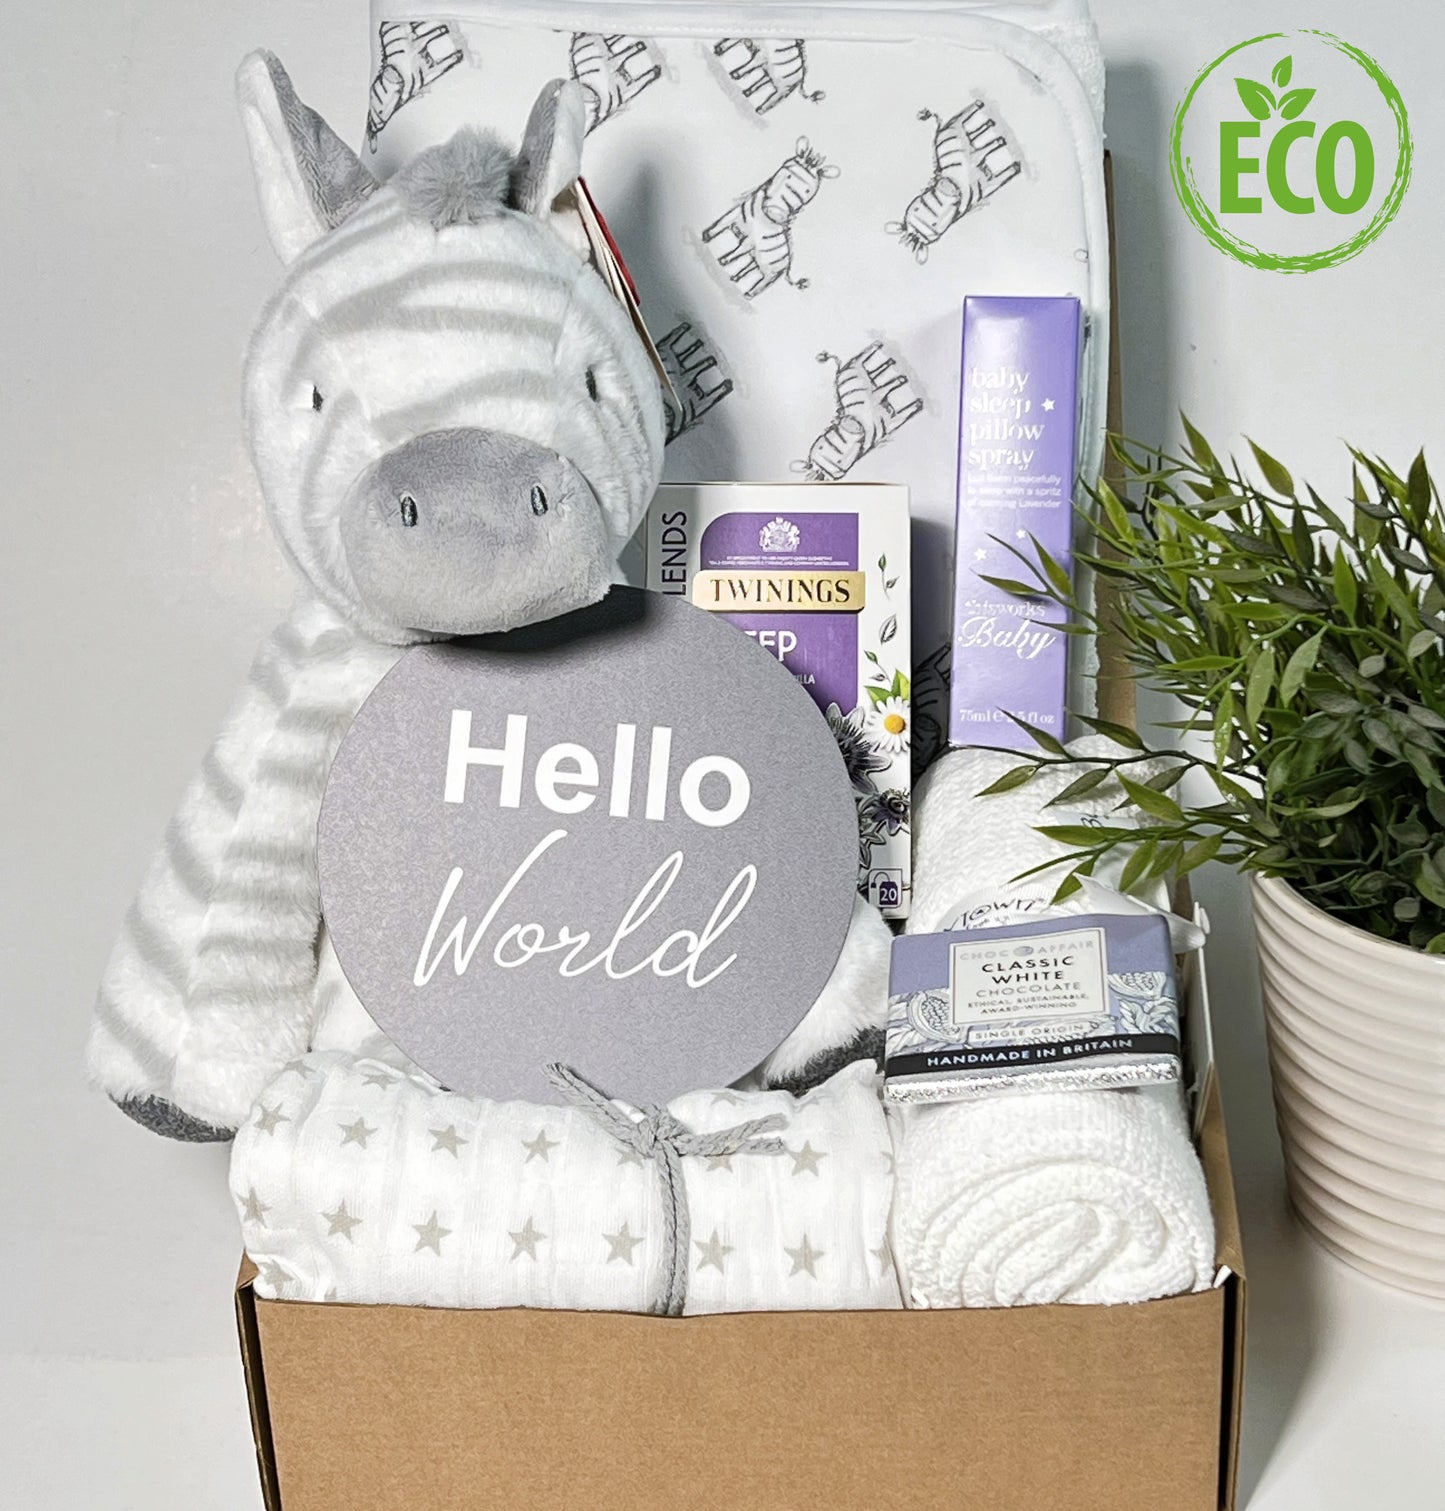 Unisex eco friendly new baby hamper containing a zebra print hooded baby towel, a zebra soft baby toy, a white cellular baby blanket, a bottle of "This Works" baby pillow spray, a packet of Twining "Sleep" teabags and a bar of chocolate.